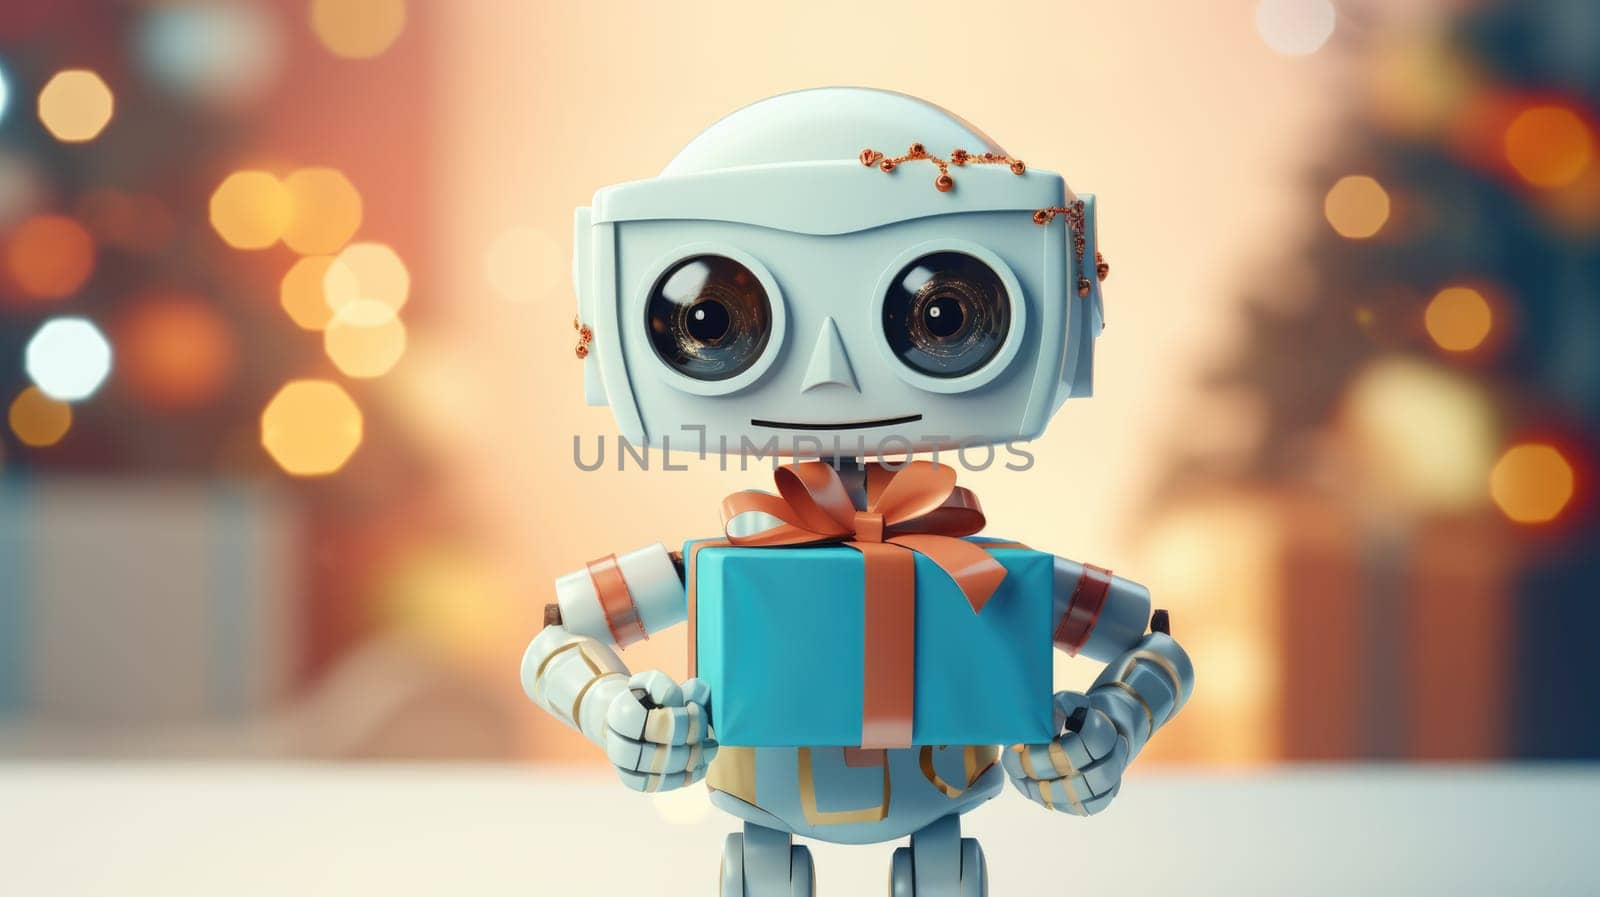 Shot of robot holding a small gift box. Holidays and celebration concept. by JuliaDorian